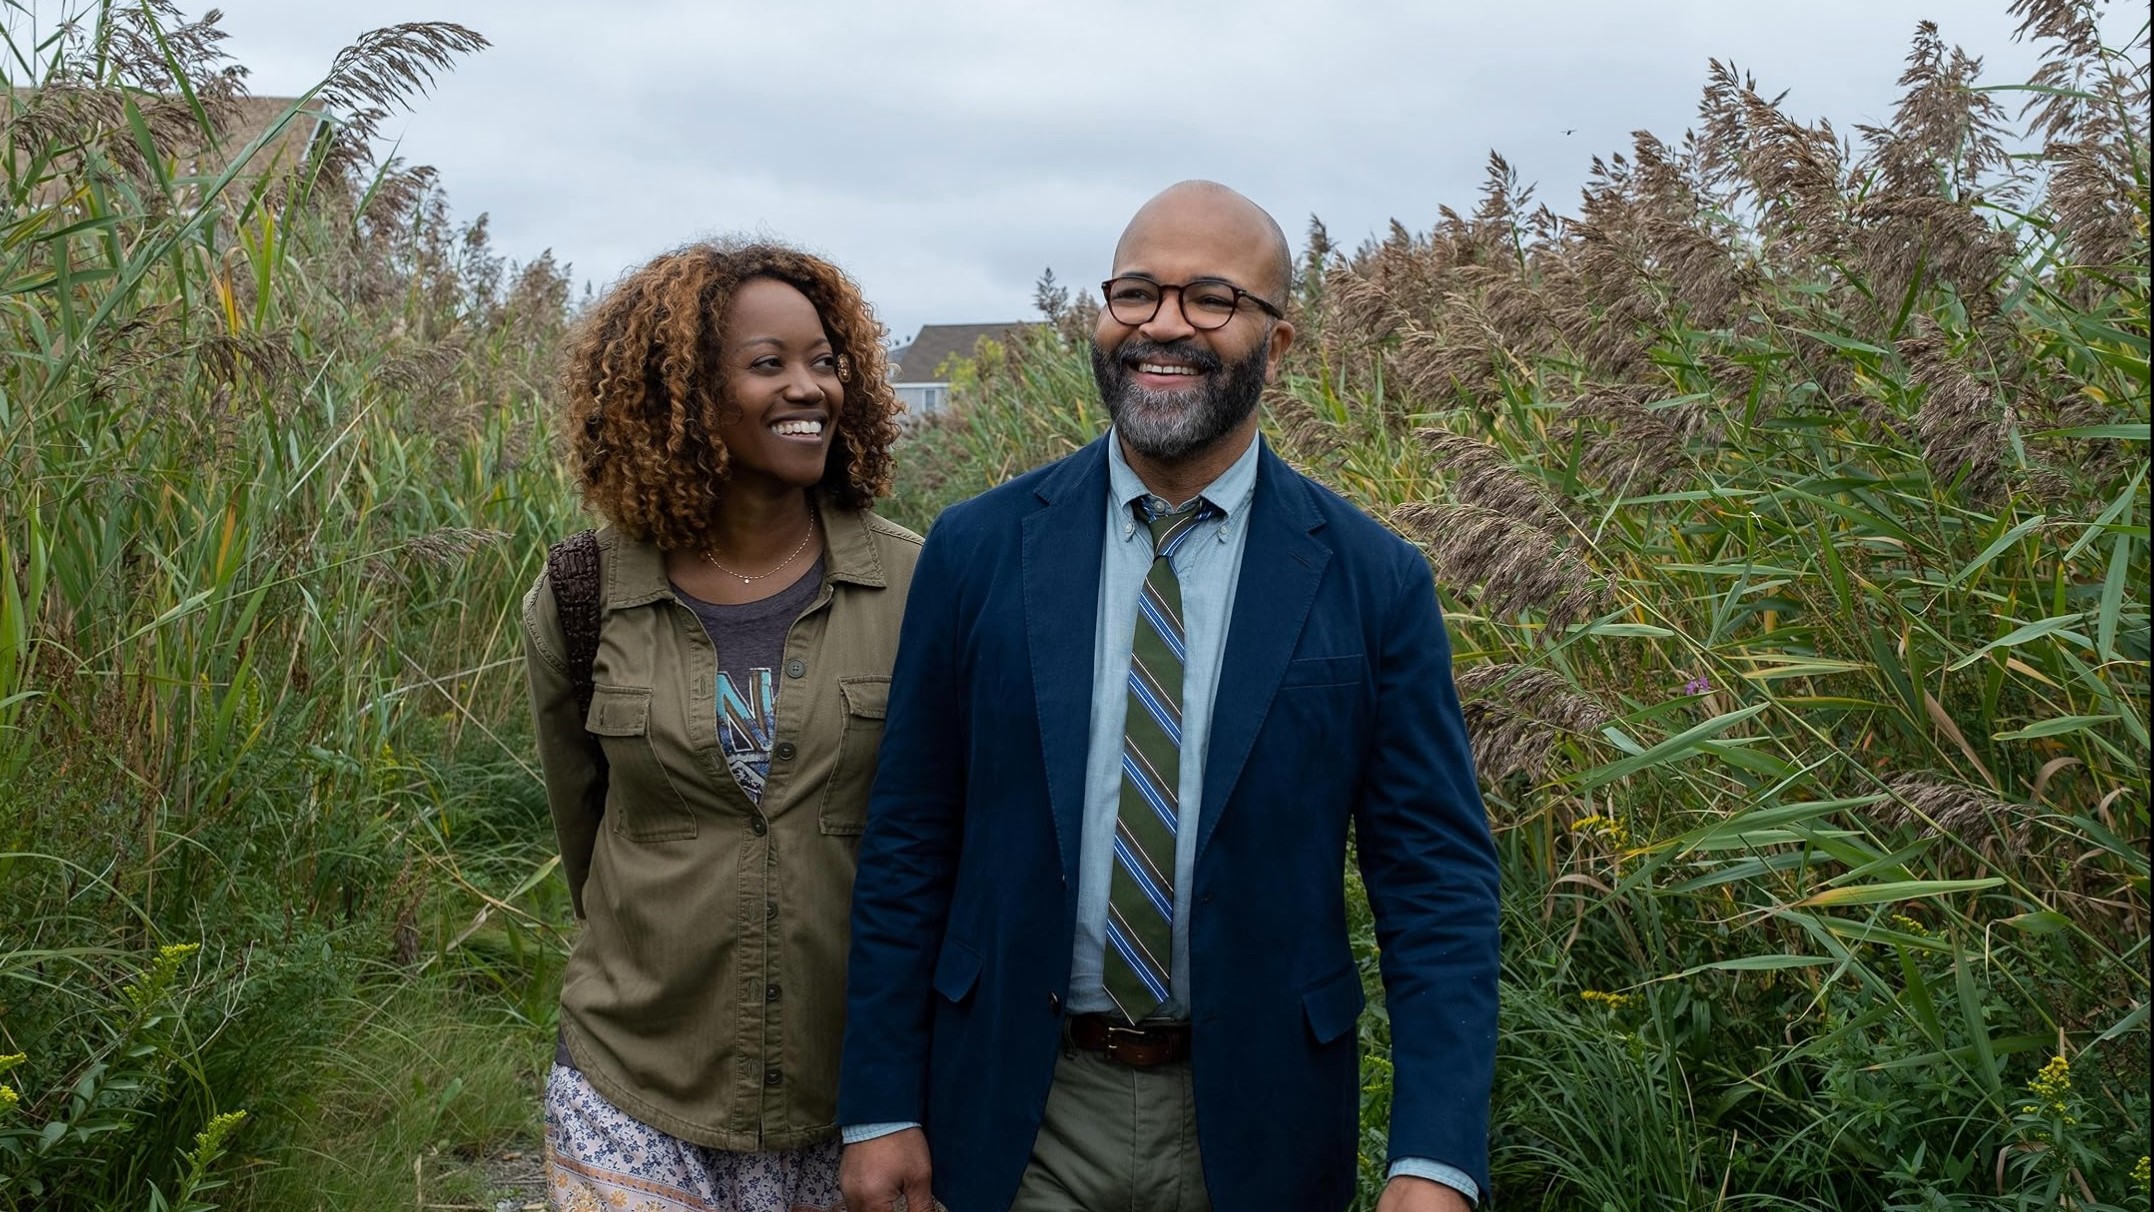 Erika Alexander and Jeffrey Wright walking together in American Fiction